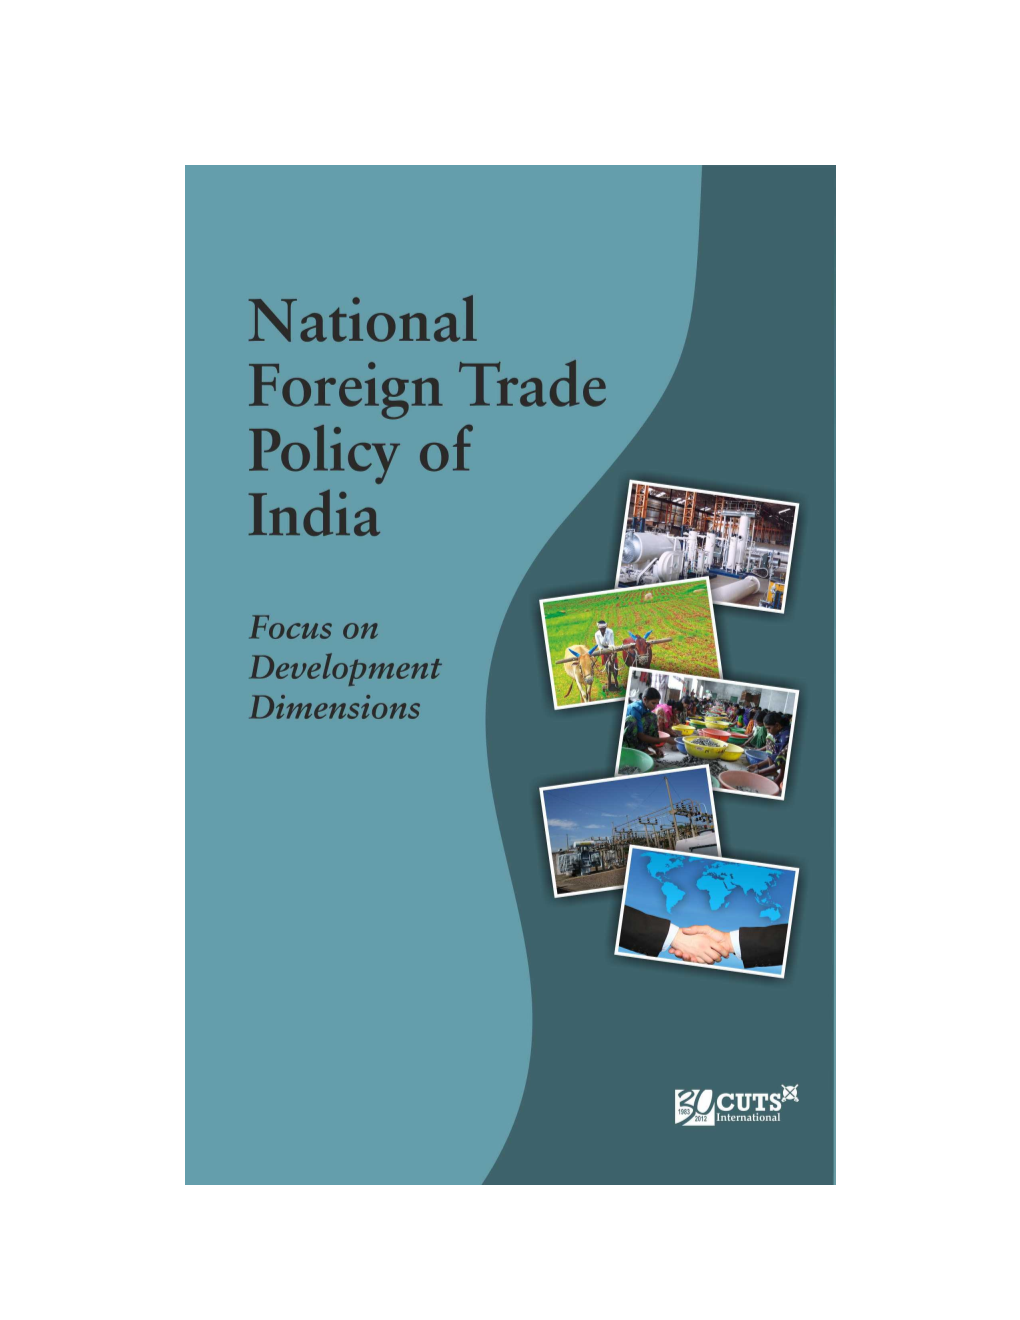 National Foreign Trade Policy of India: Focus on Development Dimensions